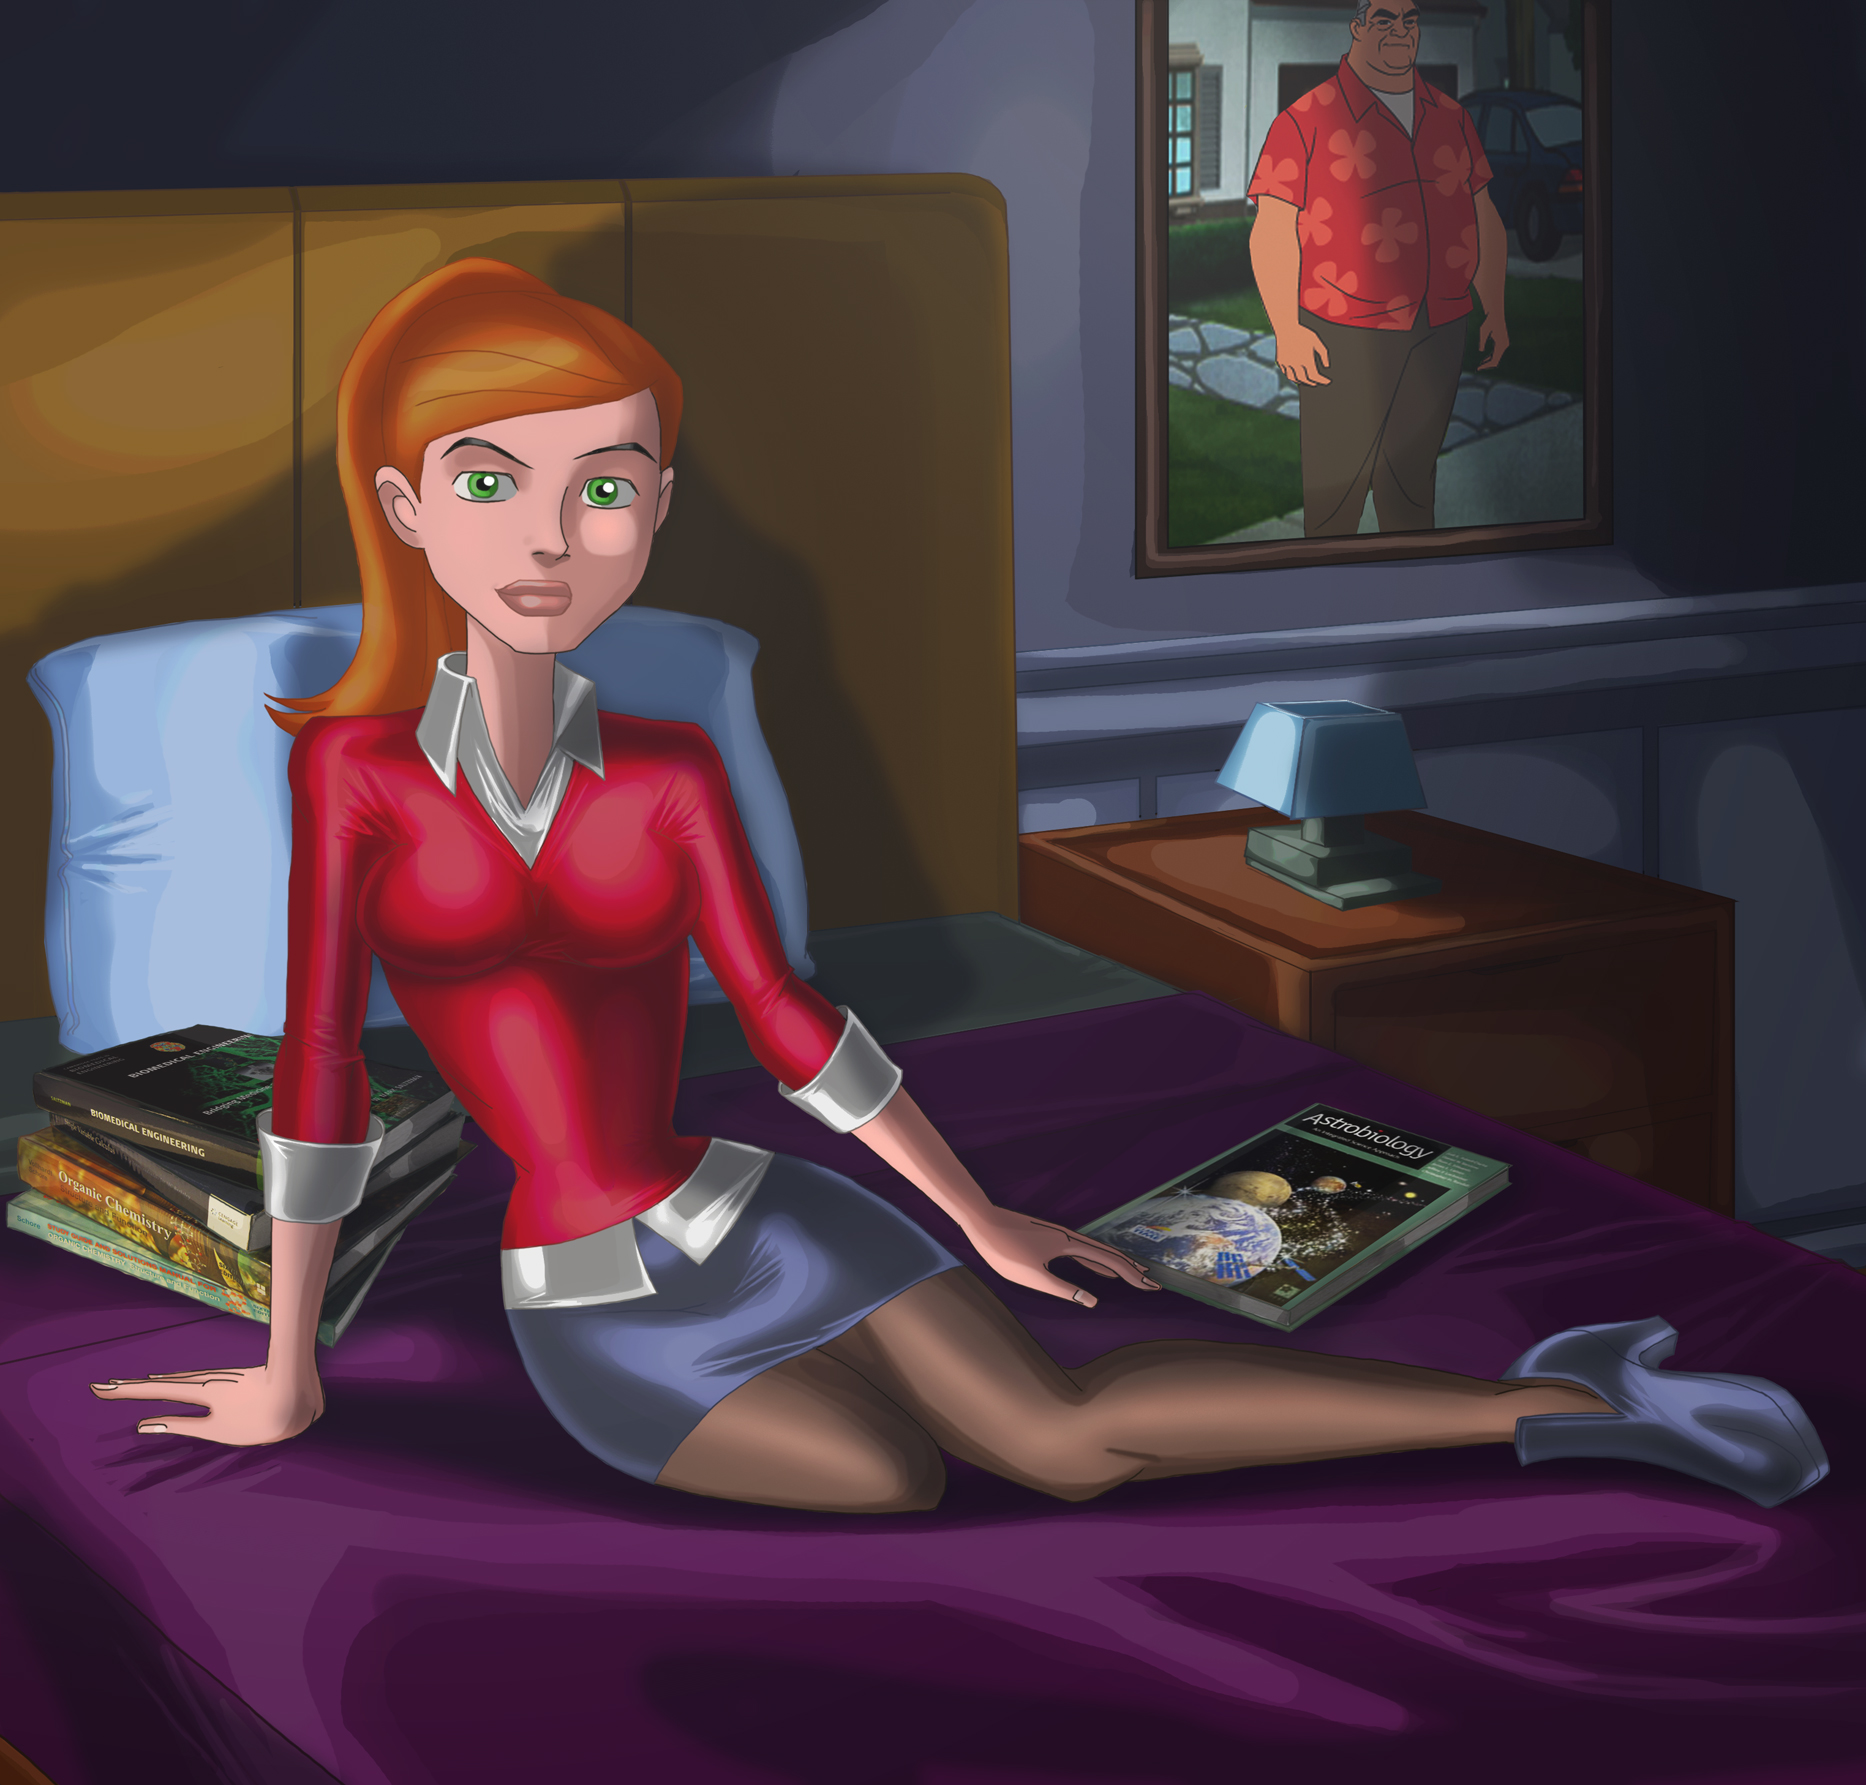 studious_in_bed_by_erikson1-d5ctizy.jpg 